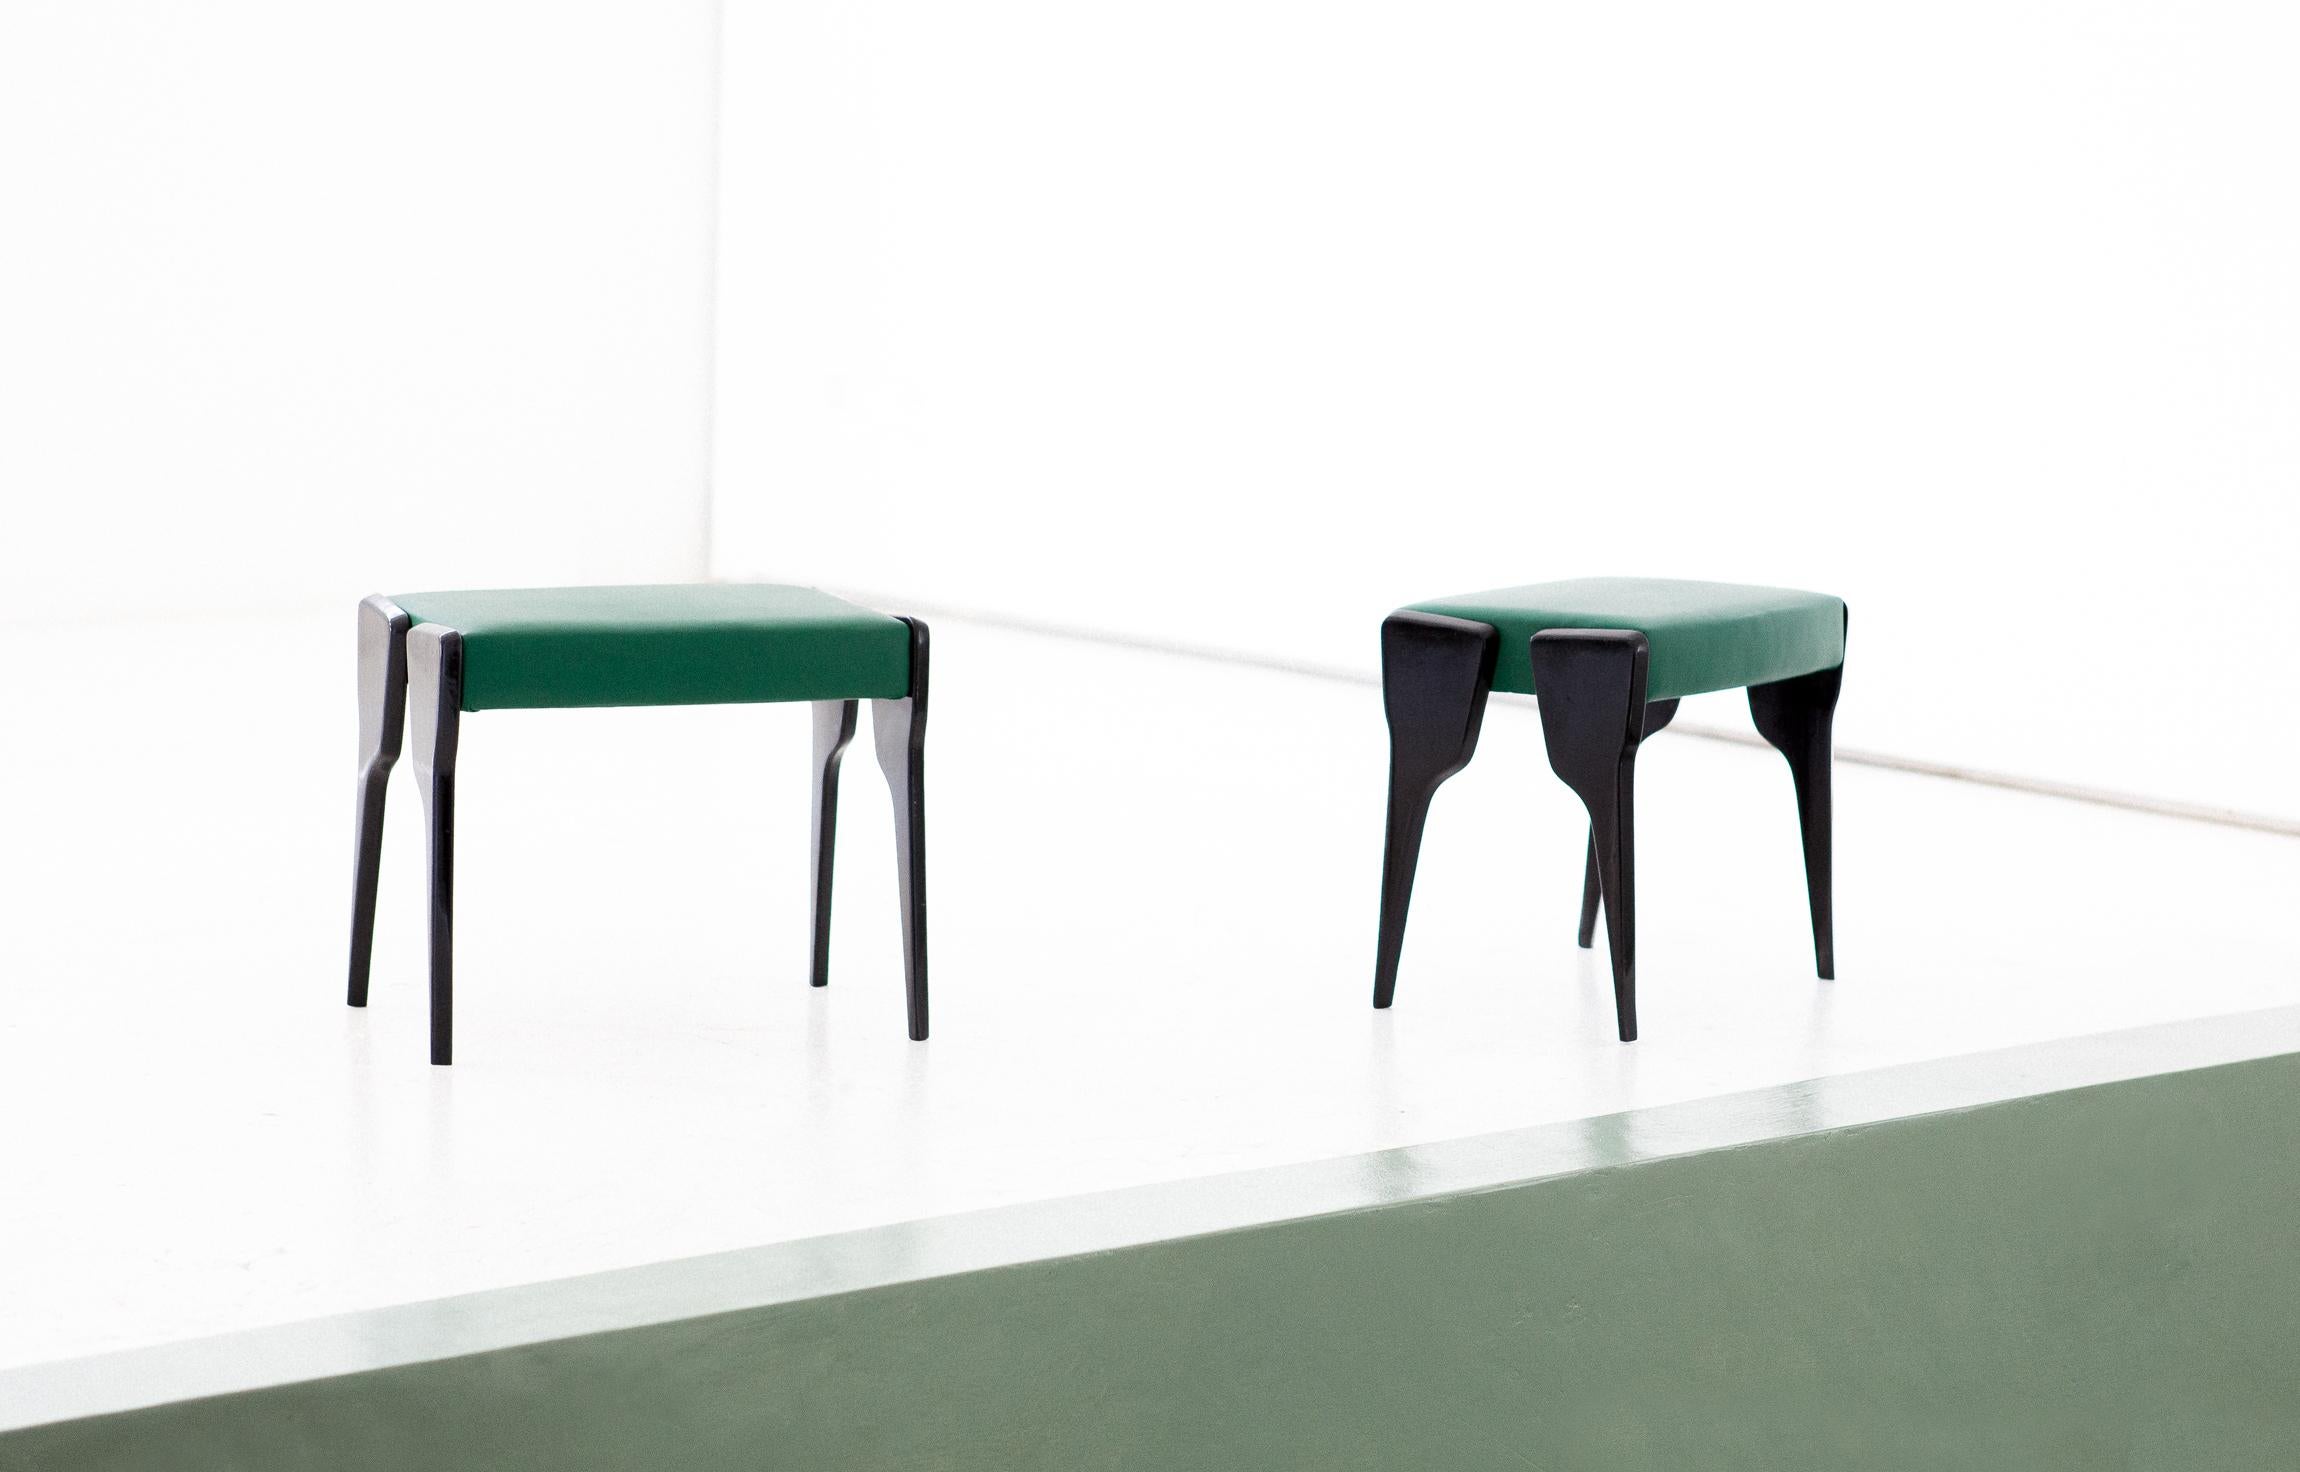 Pair of Italian Modern Stool with Black Mahogany Legs and Natural Green Leather 1